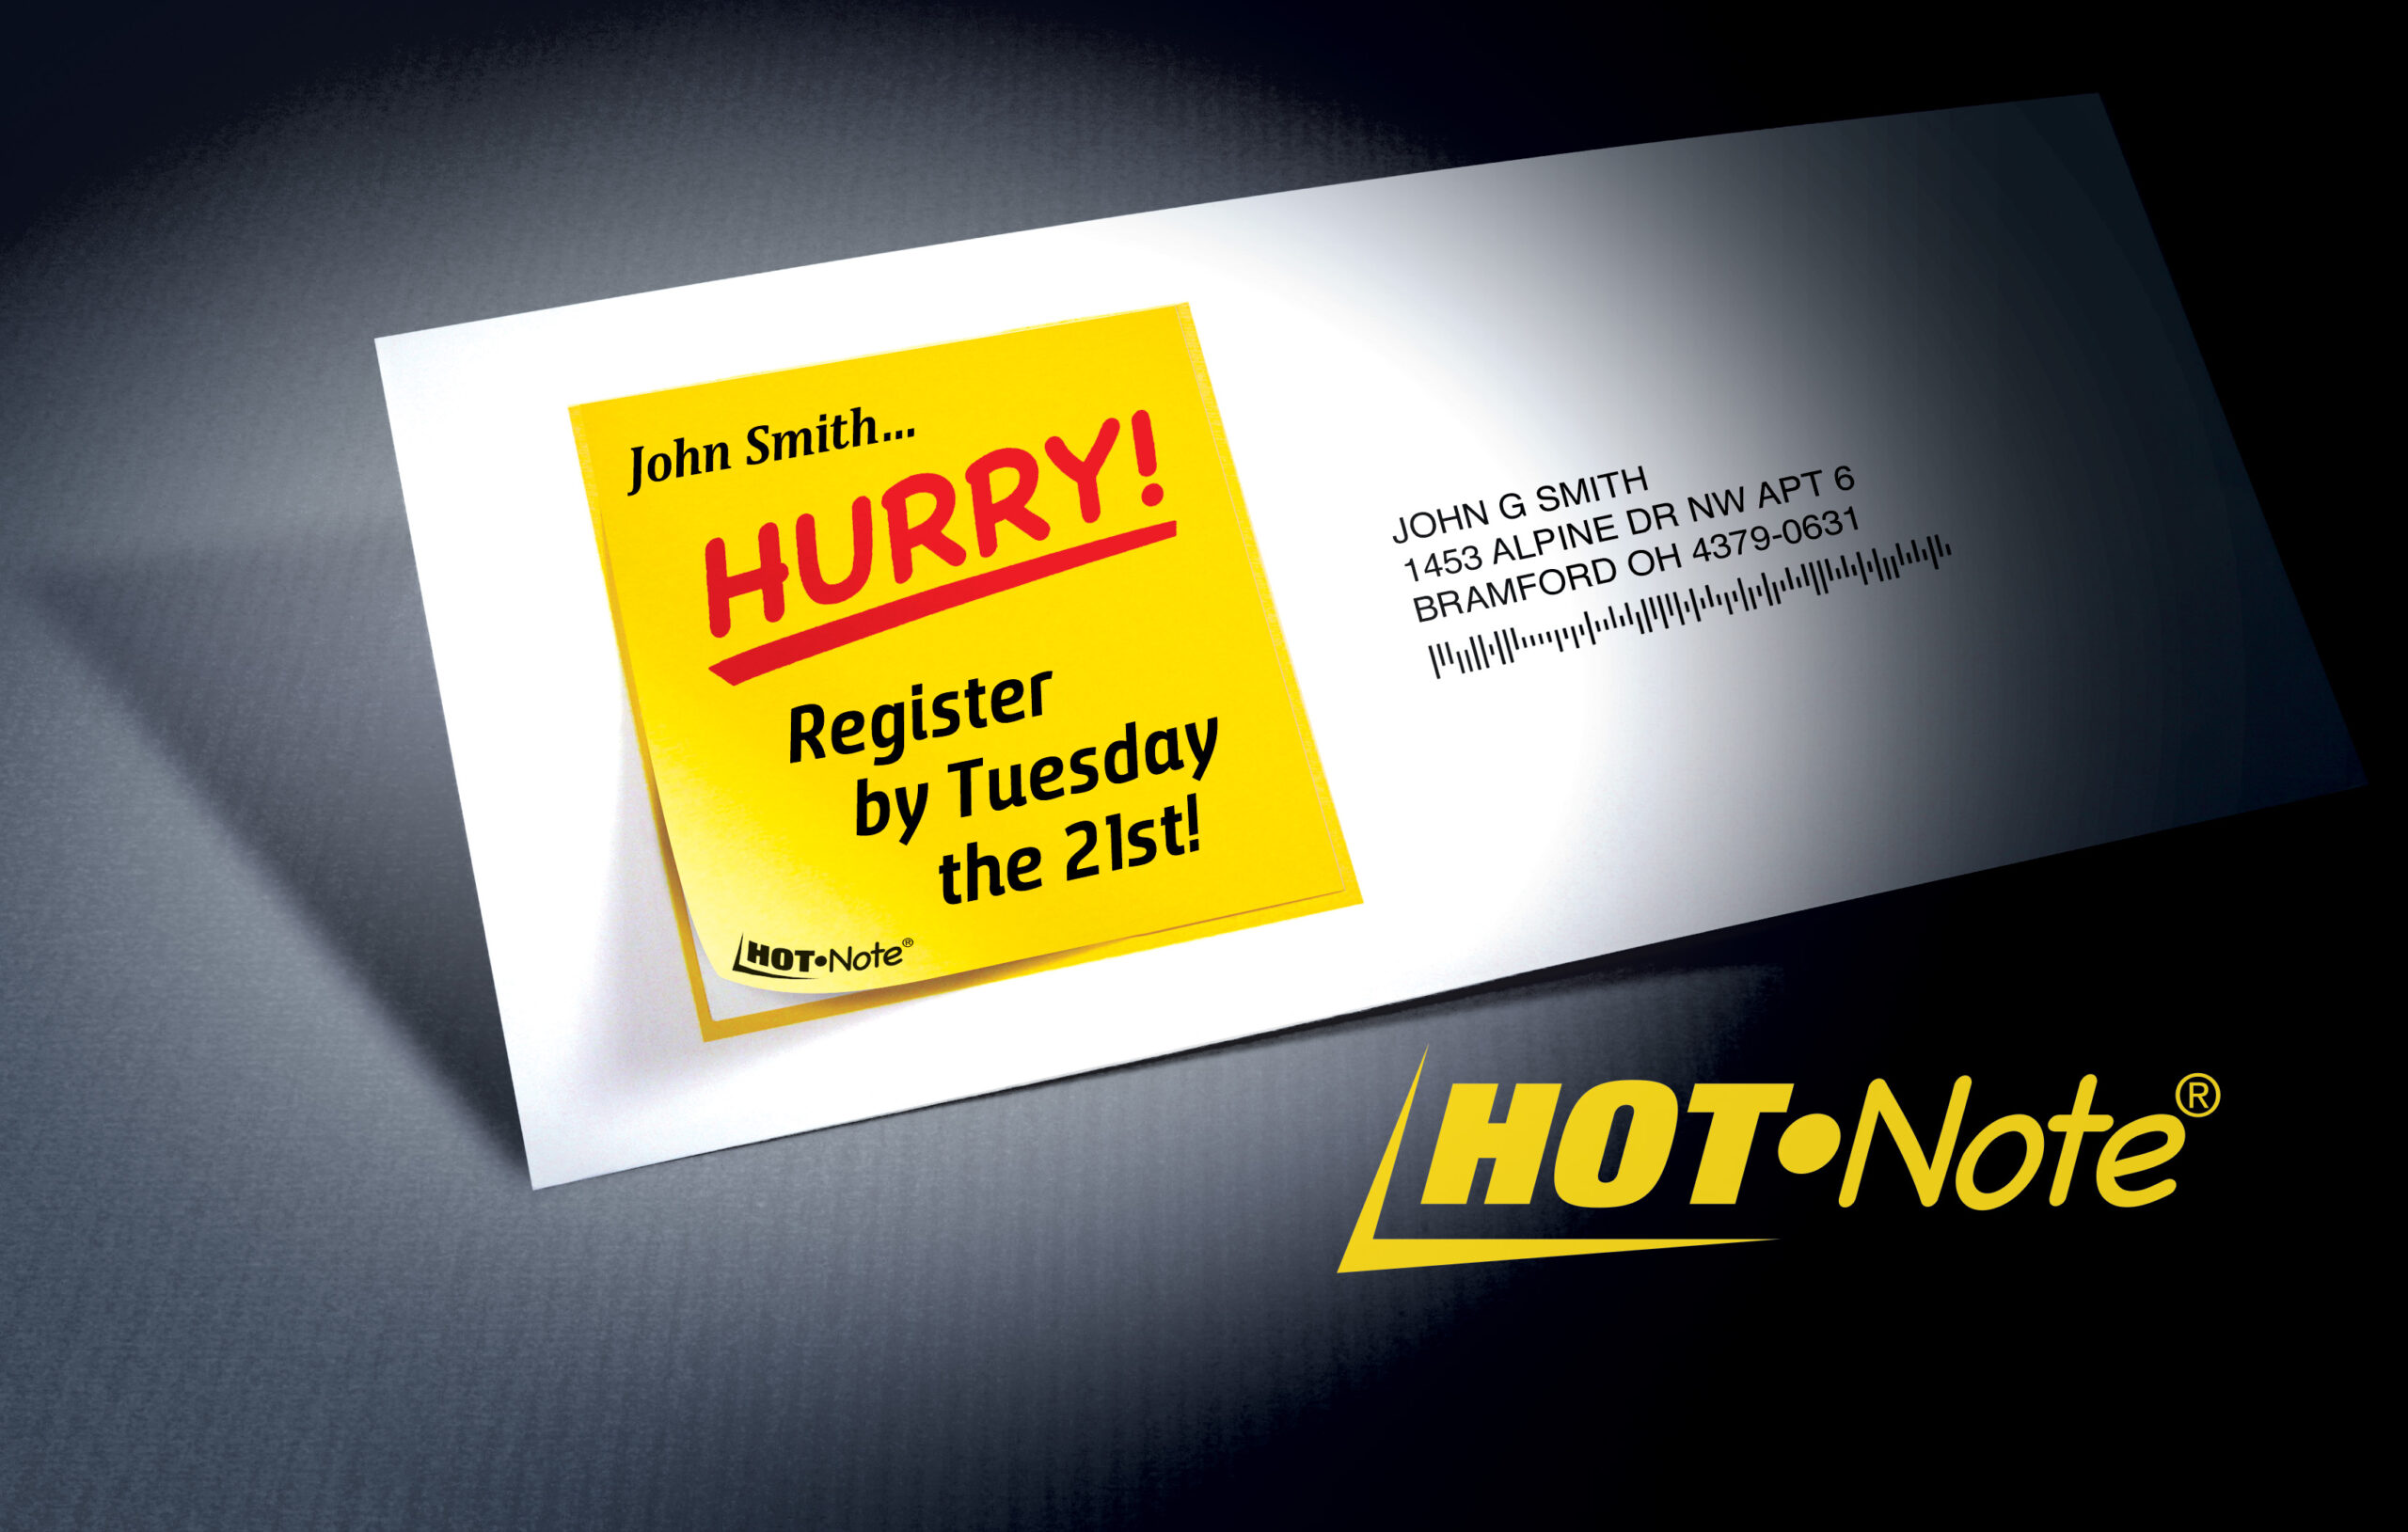 hot-note_hurry_register_the_21st